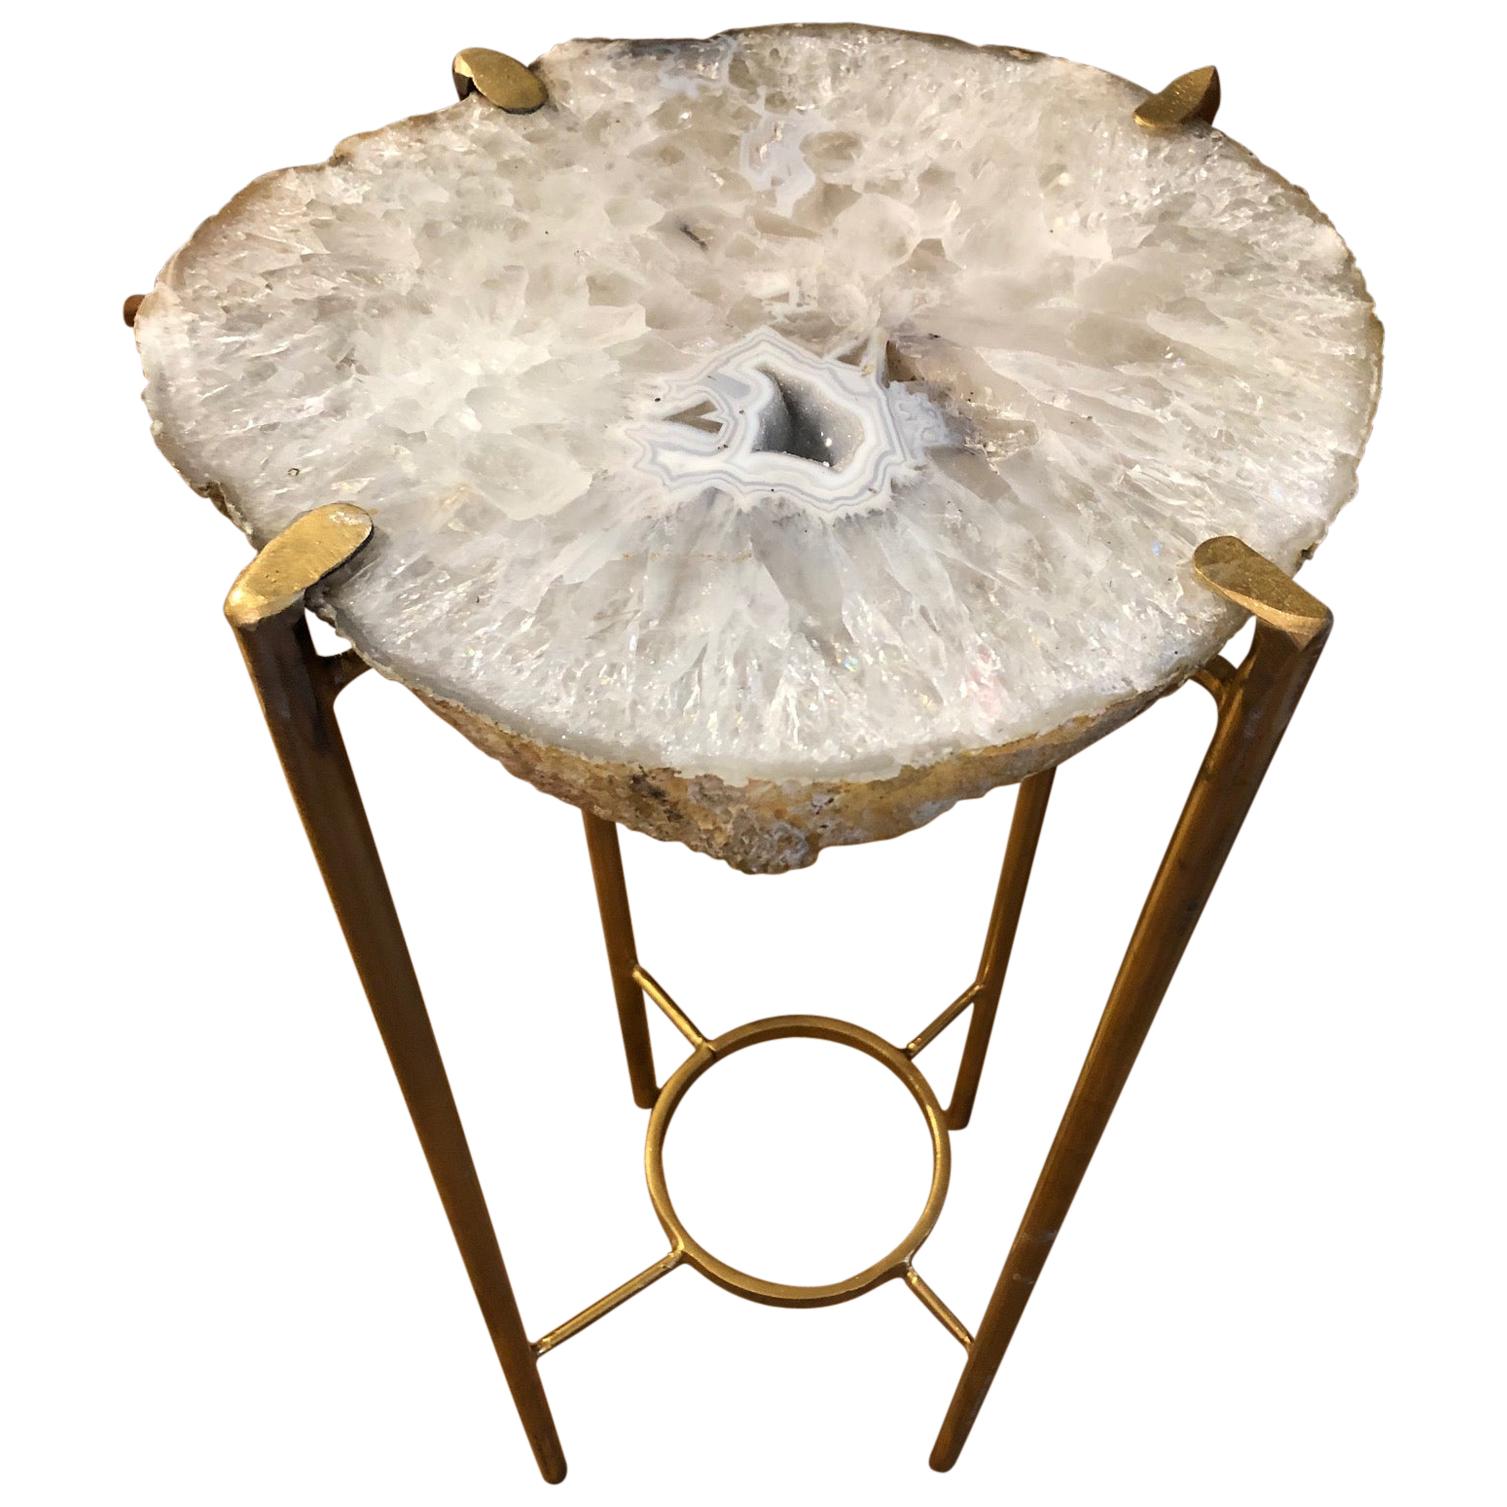 Modern Gray and White Quartz End Table with Exposed Crystal Center